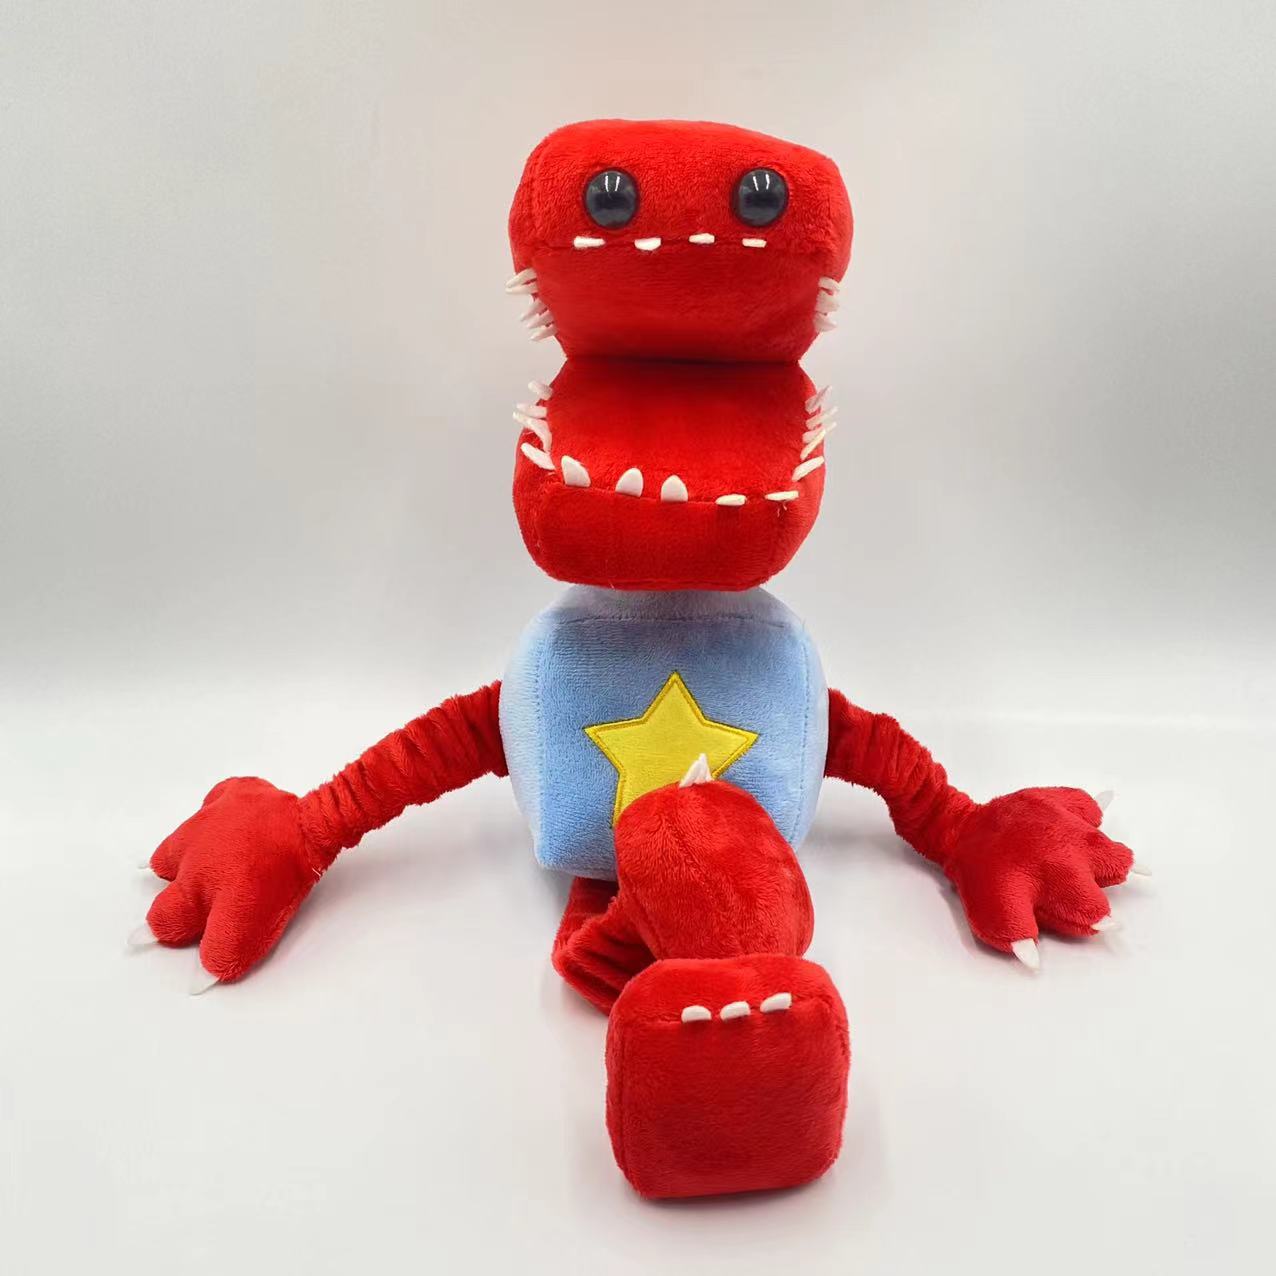 Boxy Boo Toy Cartoon Game Peripheral Red Robot Filled Plush Dolls 40cm Chidlren Toy Gift New 3 - Boxy Boo Plush